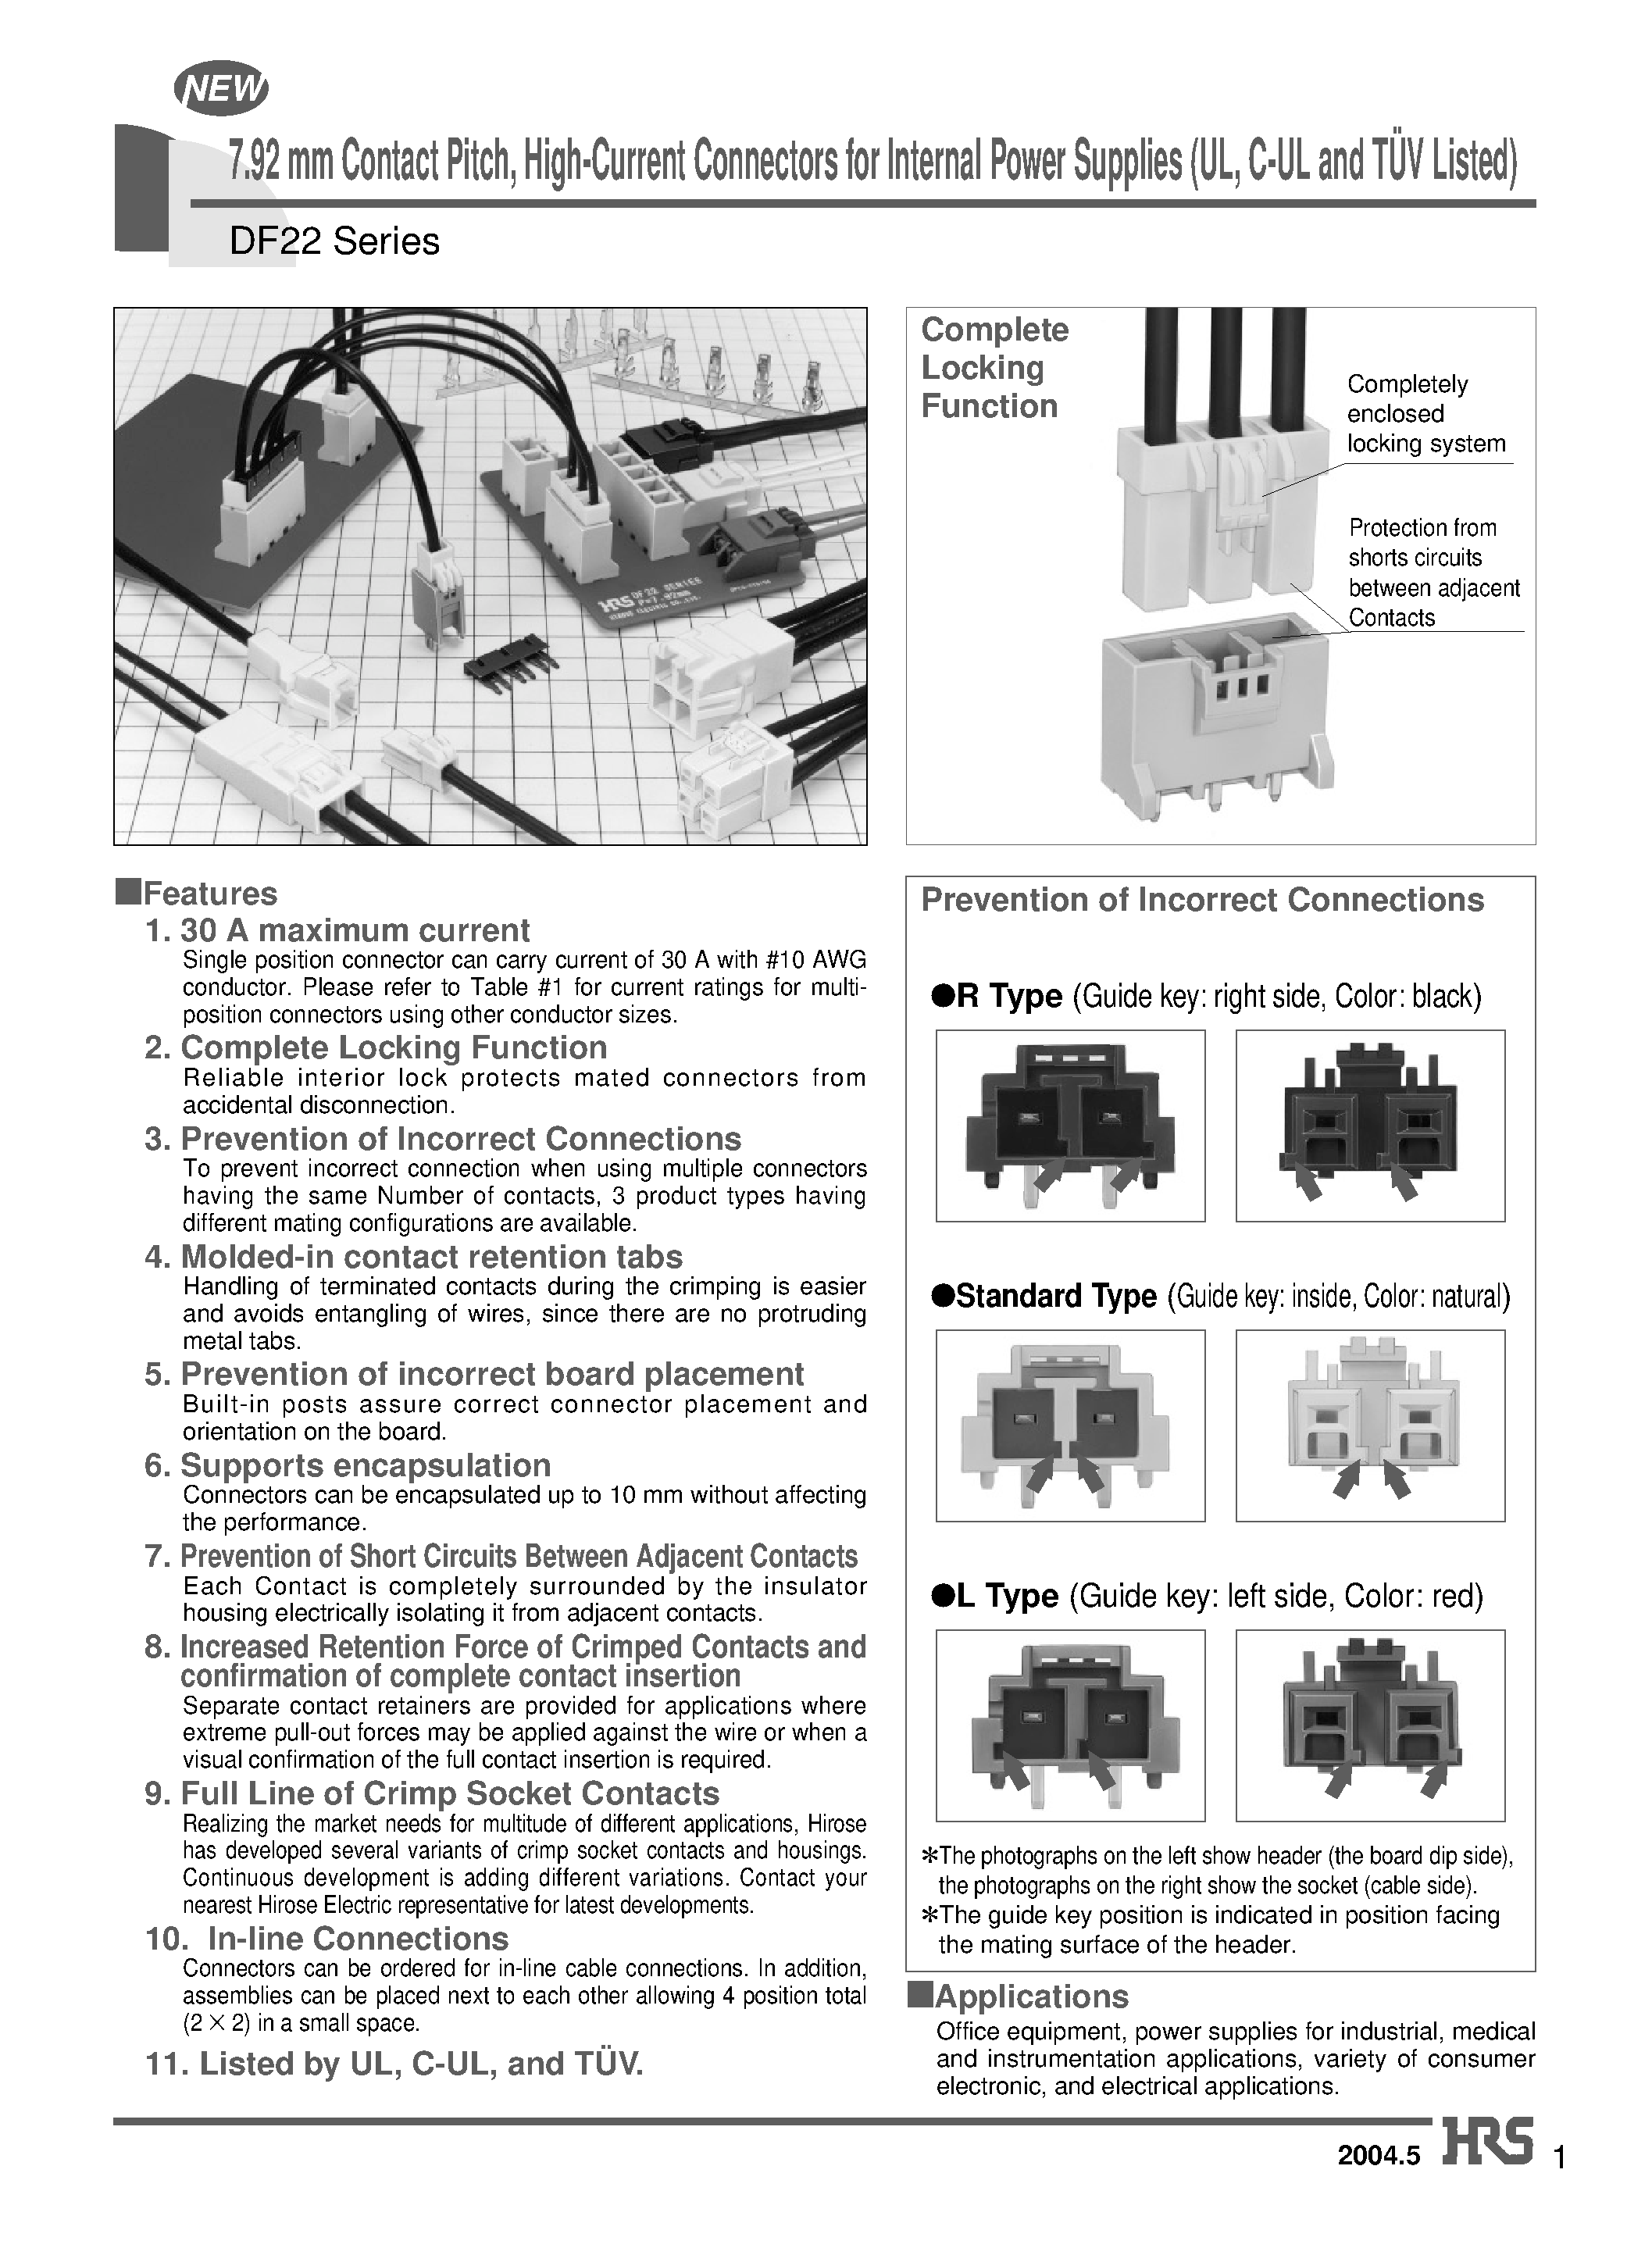 Datasheet DF22A-1EP-7.92DSA - 7.92 mm Contact Pitch/ High-Current Connectors for Internal Power Supplies (UL/ C-UL and TUV Listed) page 1